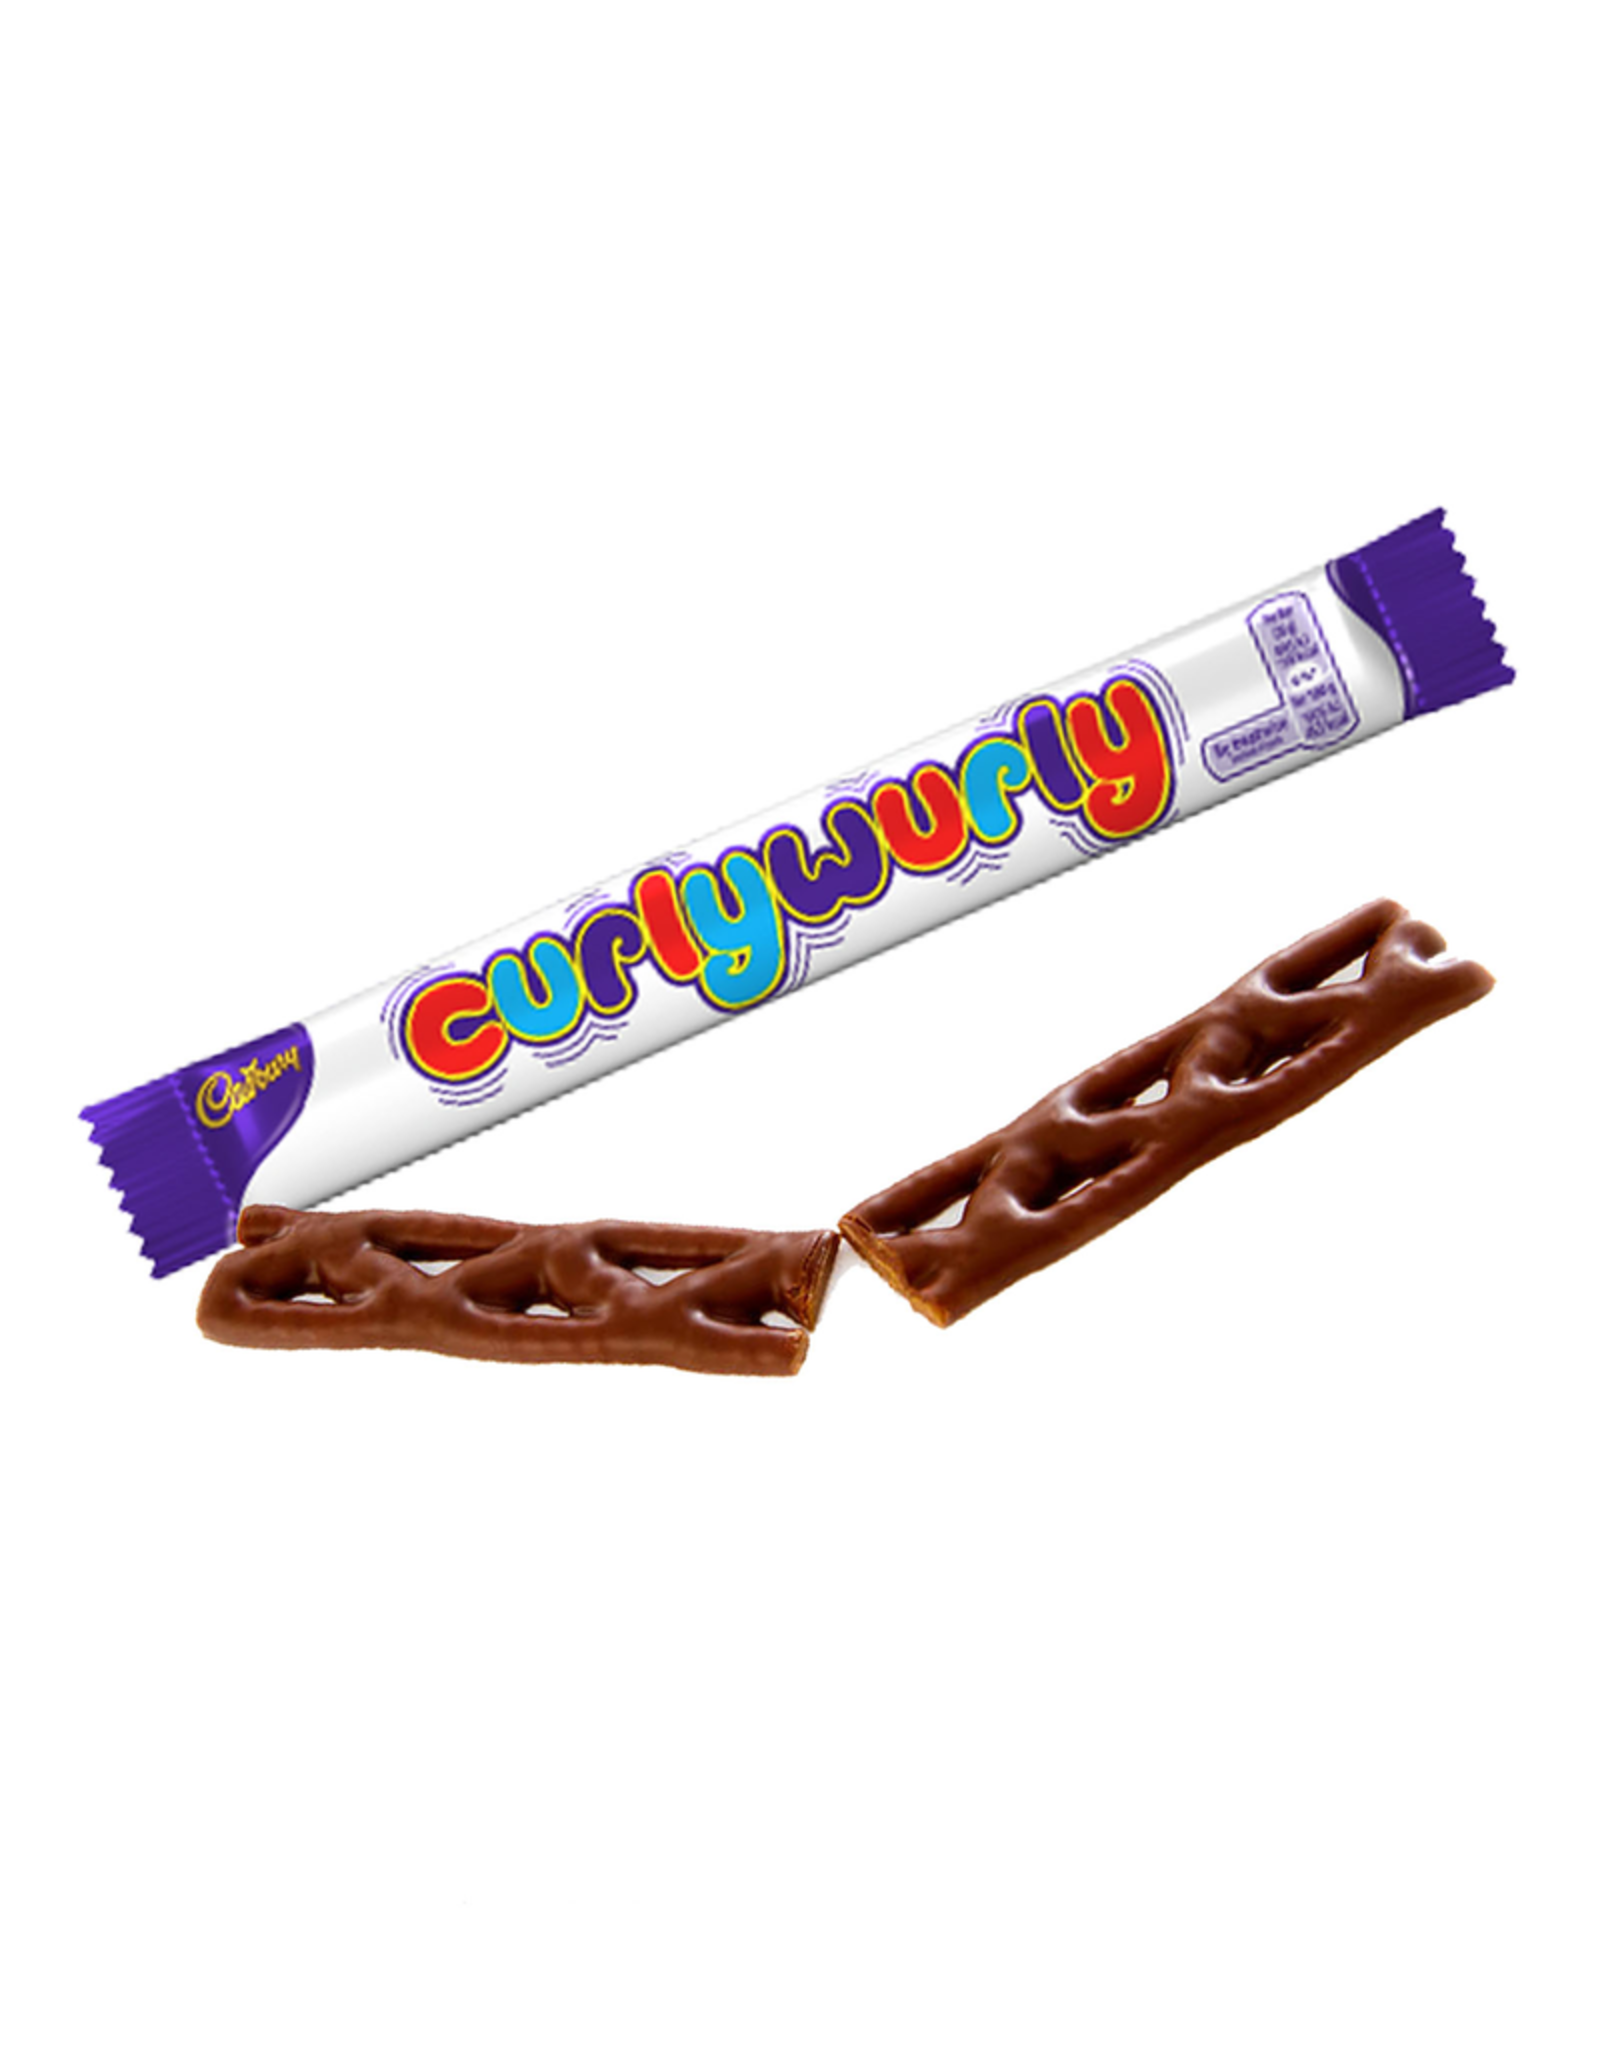 Pacific Candy Curly Wurly Bar